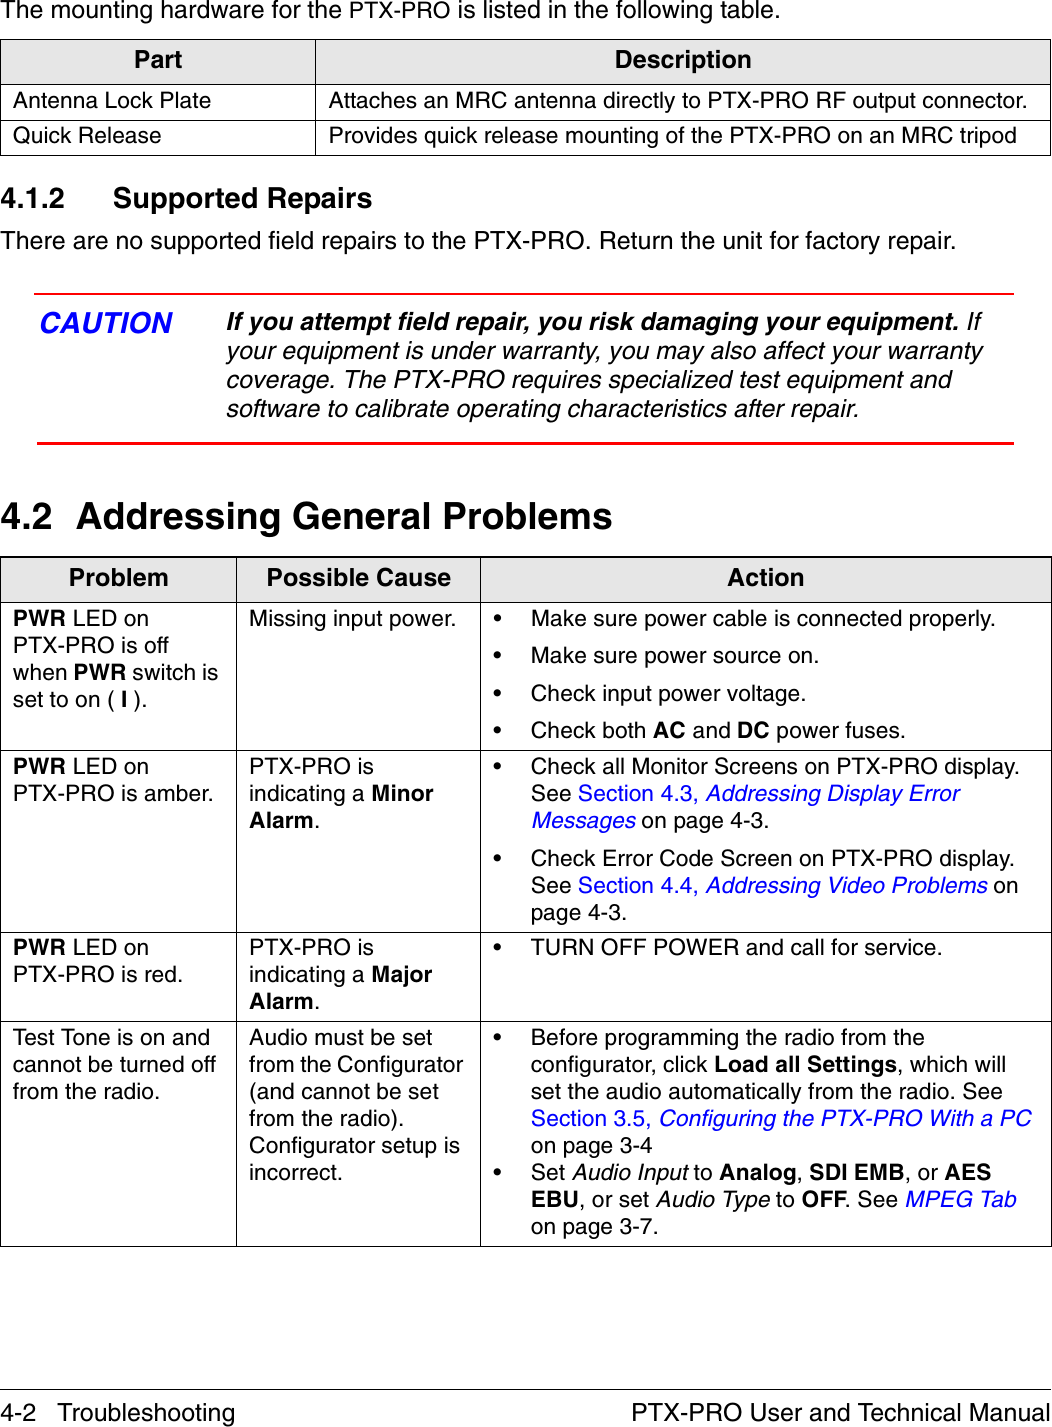 4-2   Troubleshooting PTX-PRO User and Technical ManualThe mounting hardware for the PTX-PRO is listed in the following table.4.1.2 Supported RepairsThere are no supported field repairs to the PTX-PRO. Return the unit for factory repair. CAUTION If you attempt field repair, you risk damaging your equipment. If your equipment is under warranty, you may also affect your warranty coverage. The PTX-PRO requires specialized test equipment and software to calibrate operating characteristics after repair. 4.2 Addressing General ProblemsPart DescriptionAntenna Lock Plate Attaches an MRC antenna directly to PTX-PRO RF output connector.Quick Release Provides quick release mounting of the PTX-PRO on an MRC tripodProblem Possible Cause ActionPWR LED onPTX-PRO is off when PWR switch is set to on ( I ).Missing input power. • Make sure power cable is connected properly.• Make sure power source on.• Check input power voltage.• Check both AC and DC power fuses.PWR LED on PTX-PRO is amber.PTX-PRO is indicating a Minor Alarm.• Check all Monitor Screens on PTX-PRO display. See Section 4.3, Addressing Display Error Messages on page 4-3.• Check Error Code Screen on PTX-PRO display. See Section 4.4, Addressing Video Problems on page 4-3.PWR LED on PTX-PRO is red.PTX-PRO is indicating a Major Alarm.• TURN OFF POWER and call for service.Test Tone is on and cannot be turned off from the radio.Audio must be set from the Configurator (and cannot be set from the radio). Configurator setup is incorrect. • Before programming the radio from the configurator, click Load all Settings, which will set the audio automatically from the radio. See Section 3.5, Configuring the PTX-PRO With a PC on page 3-4•Set Audio Input to Analog, SDI EMB, or AES EBU, or set Audio Type to OFF. See MPEG Tab on page 3-7.